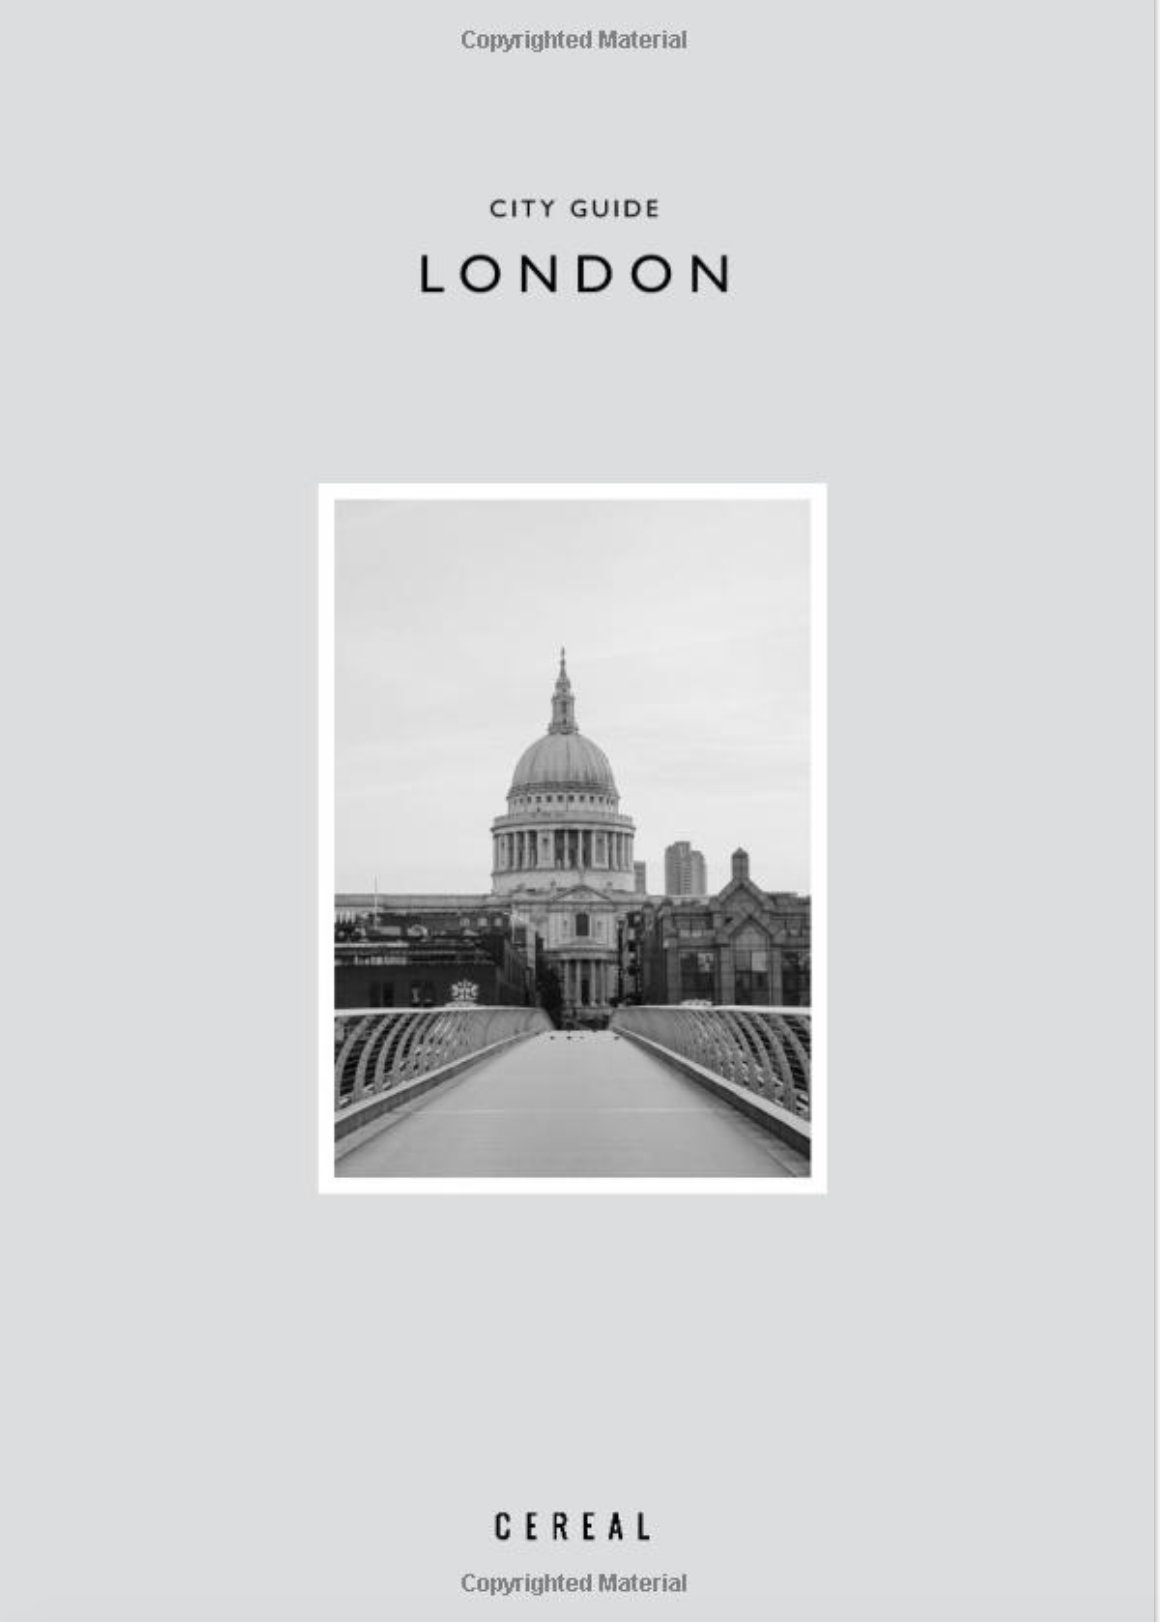 City Guide: London by Cereal - Mod + Jo